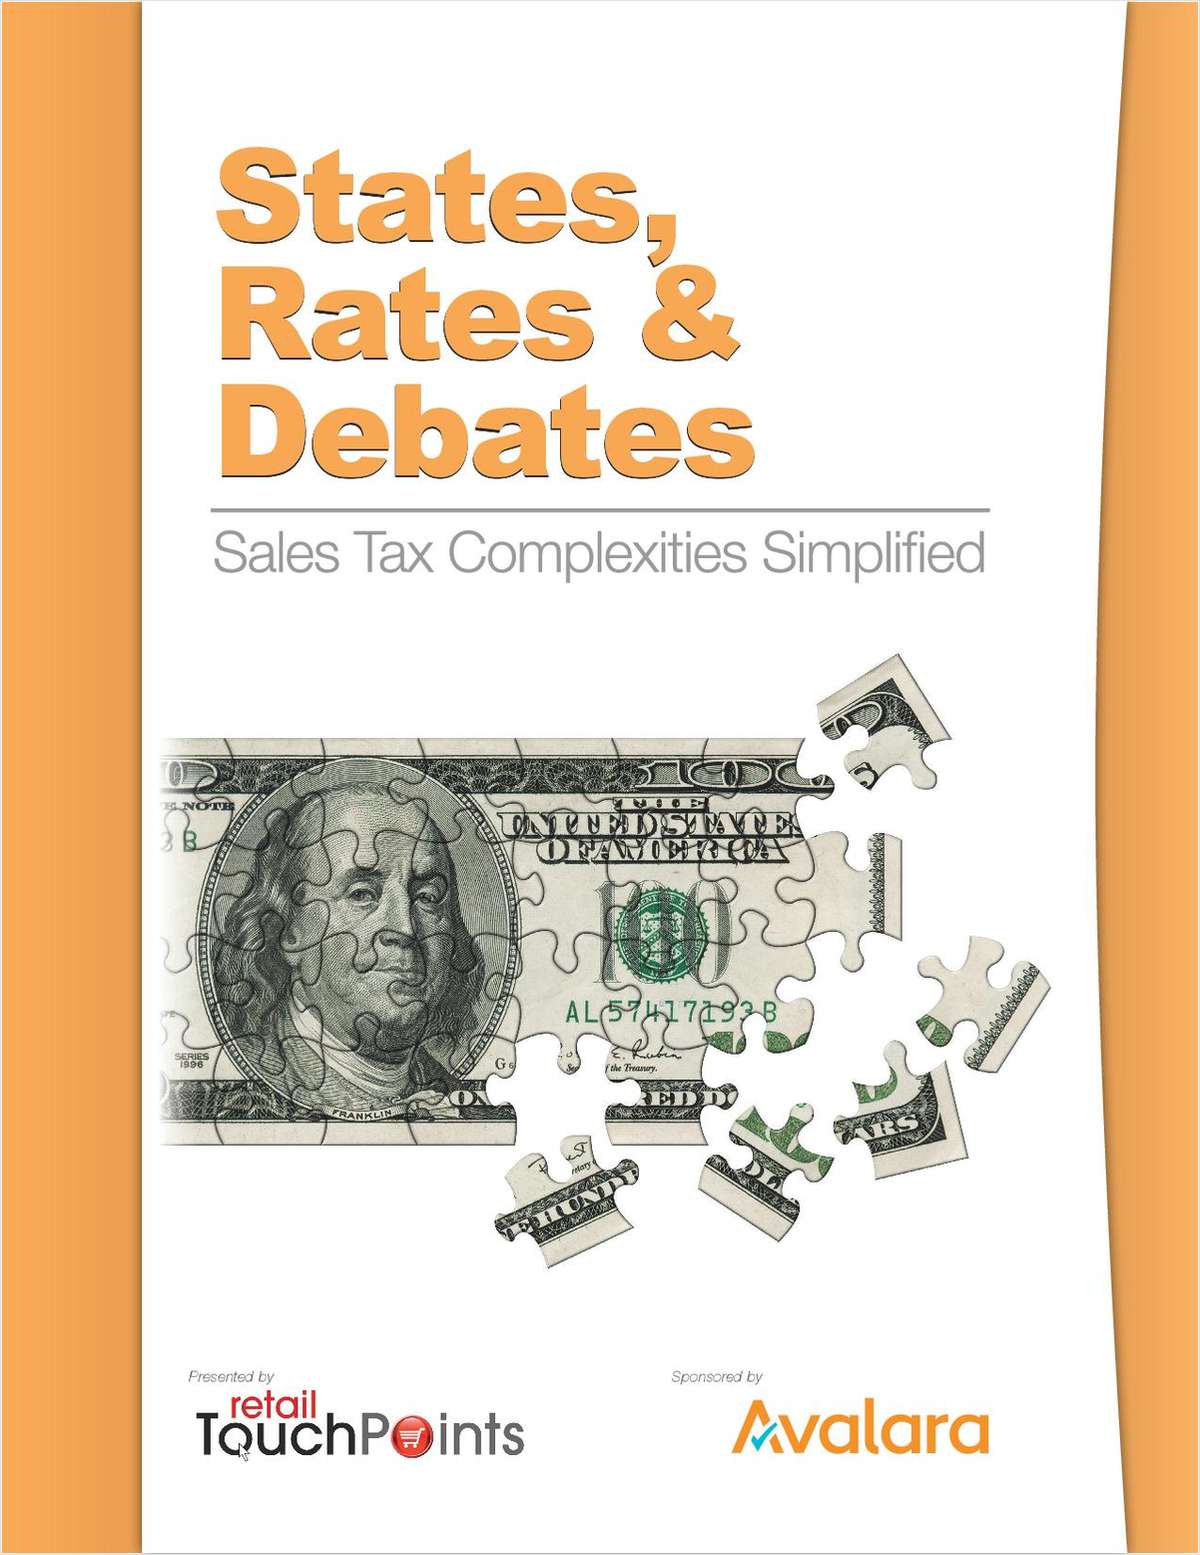 States, Rates & Debates: Sales Tax Complexities Simplified for Retail and POS